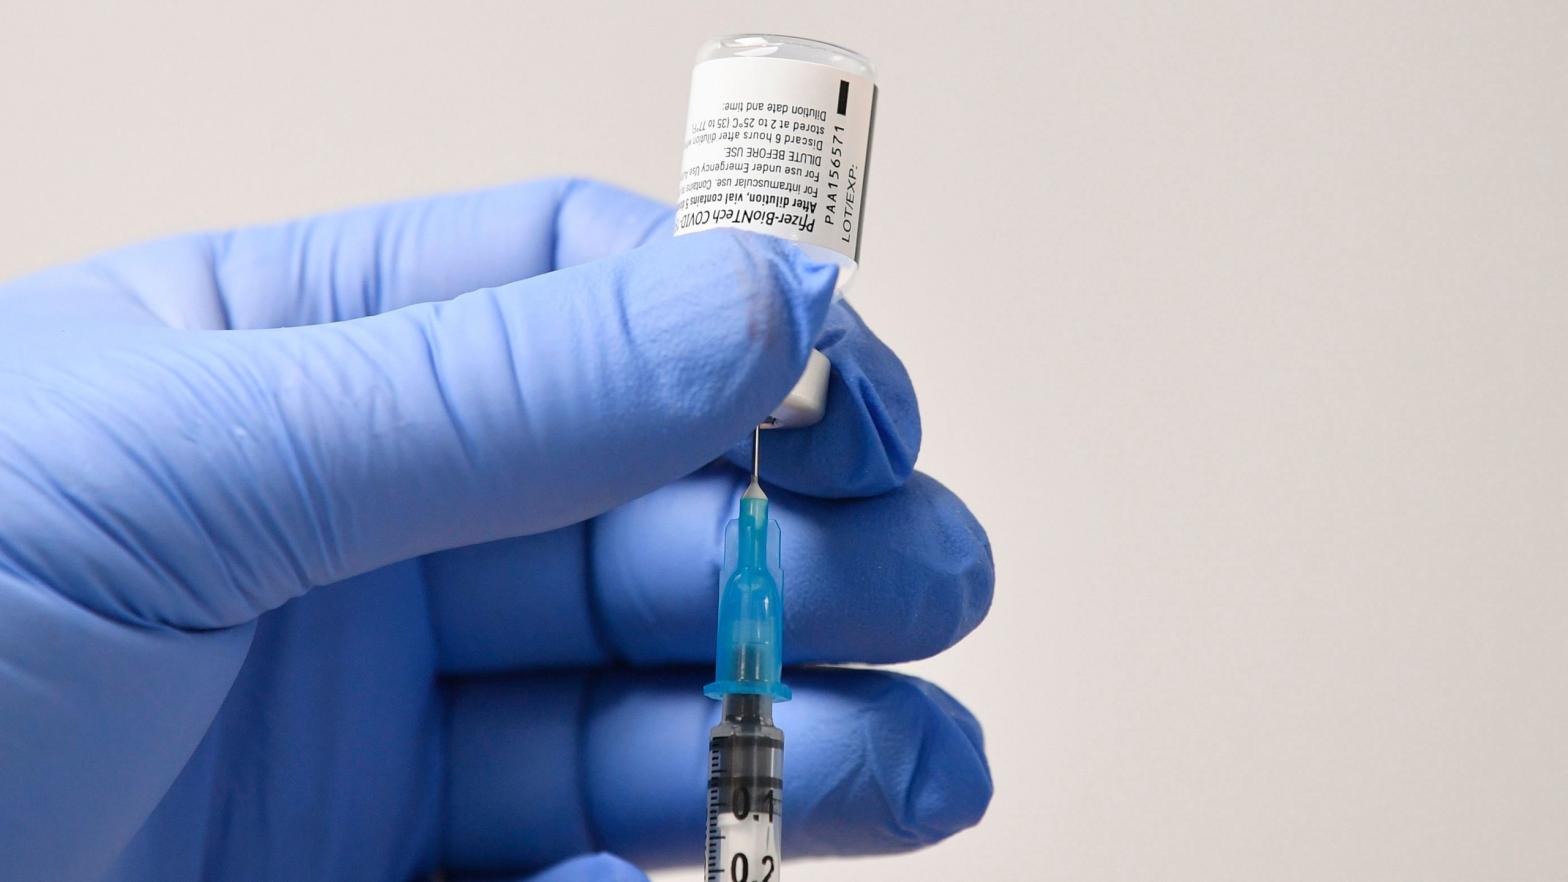 A member of staff uses a needle and a vial of Pfizer-BioNTech Covid-19 vaccine to prepare a dose at a vaccination health centre in Cardiff, South Wales' on December 8, 2020. (Photo: Justin Tallis, Getty Images)